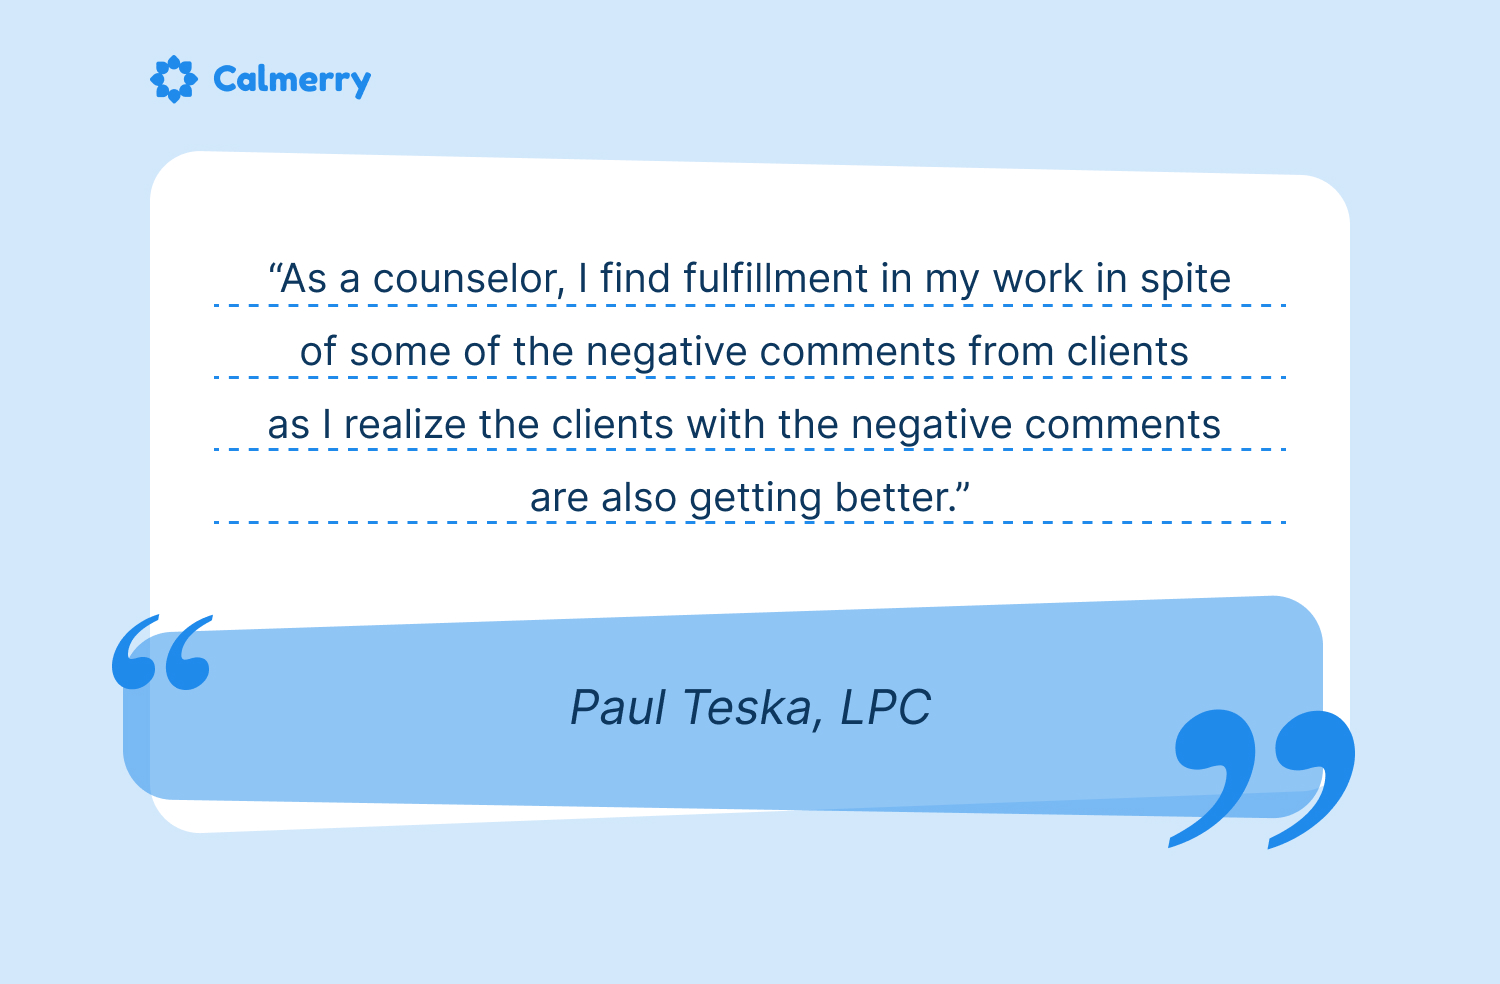 Paul Teska, LPC, quote: "As a counselor, I find fulfillment in my work in spite of some of the negative comments from clients as I realize the clients with the negative comments are also getting better."